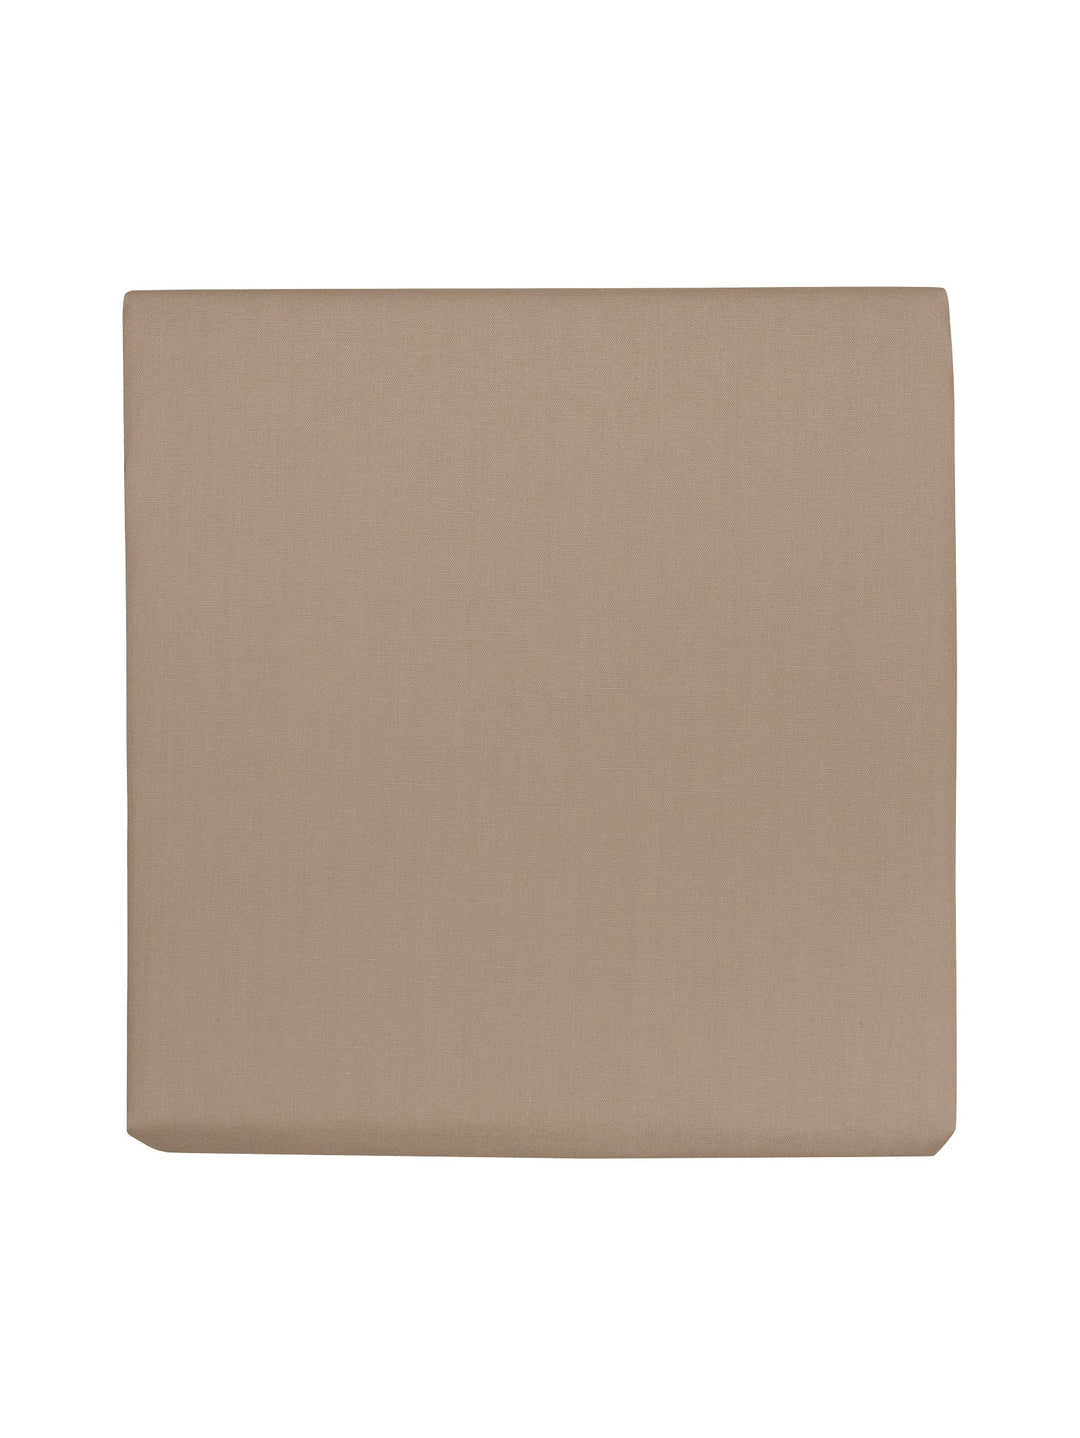 Cotton Wash Fitted Sheet - Fitted Sheet- Hertex Haus Online - bed & bath